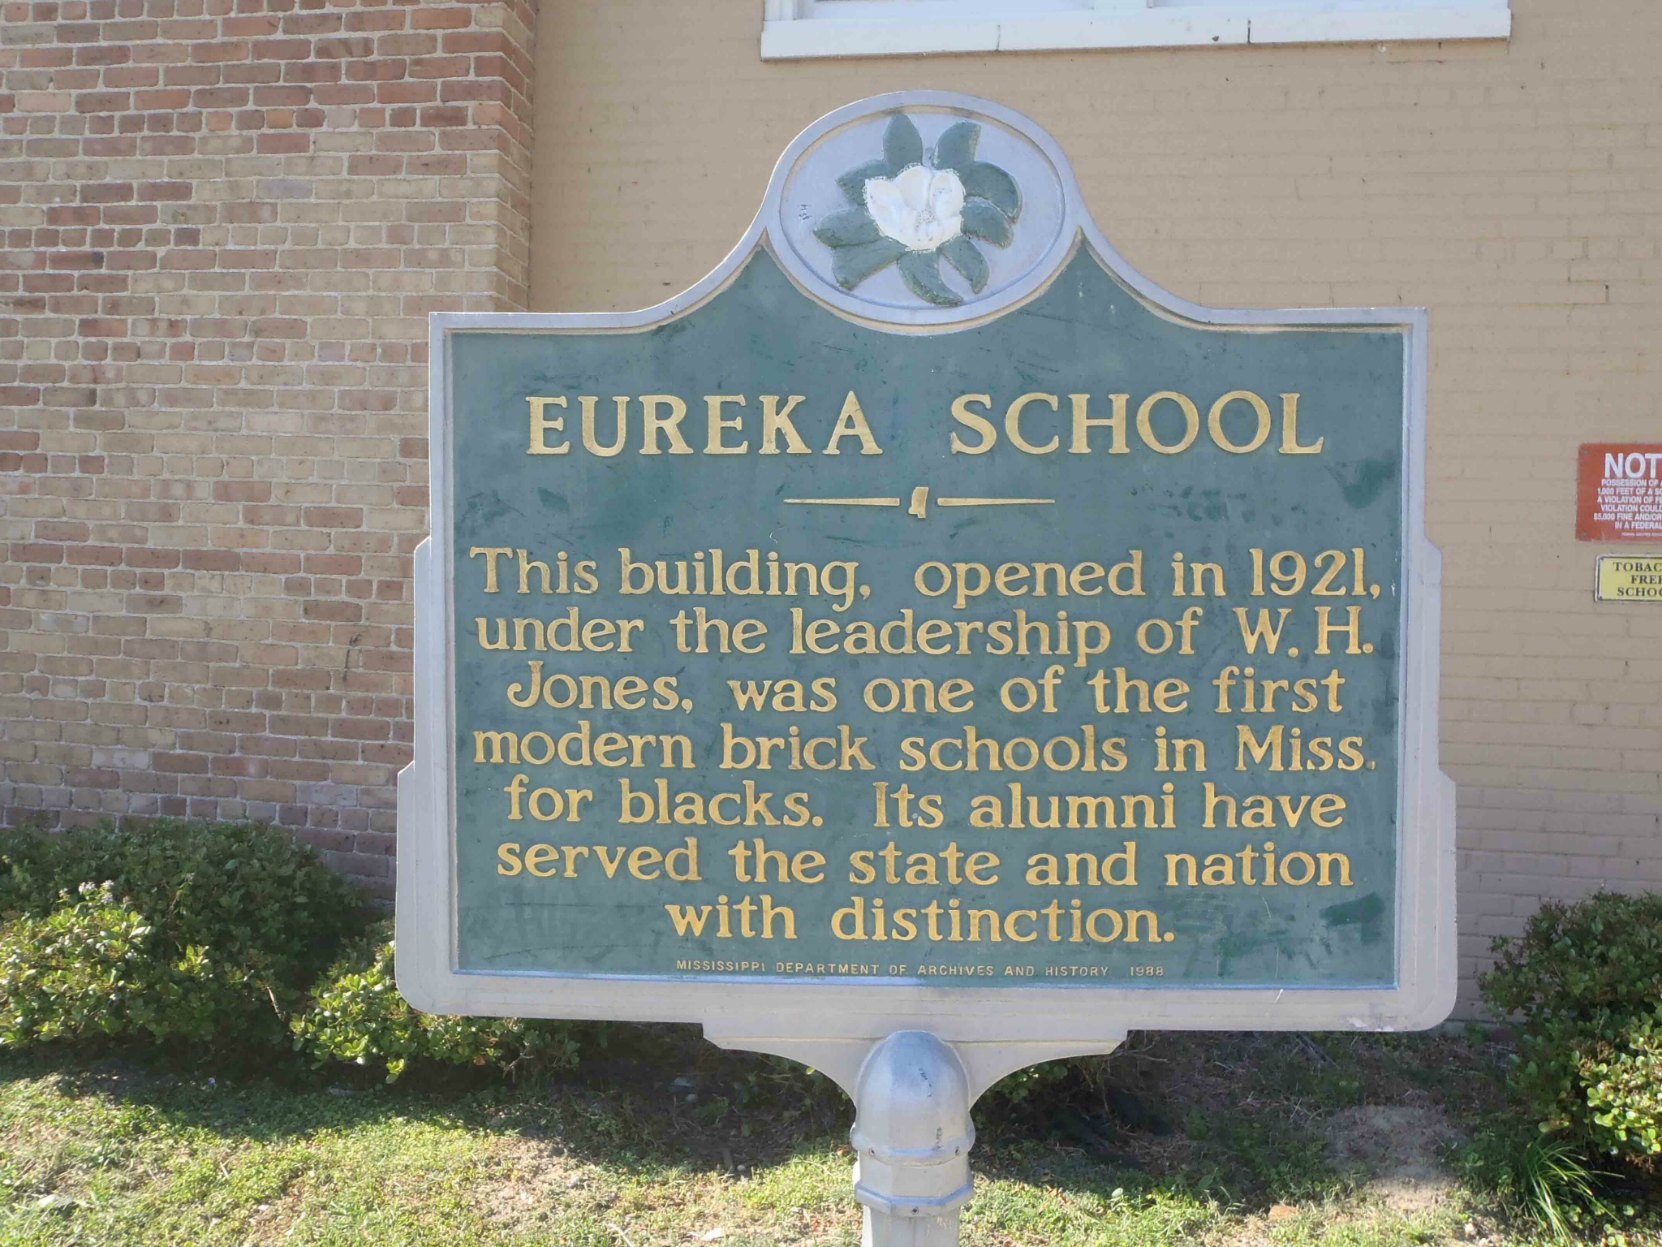 The Mississippi Department of Archives & History marker at the Eureka School, Hattiesburg, Mississippi